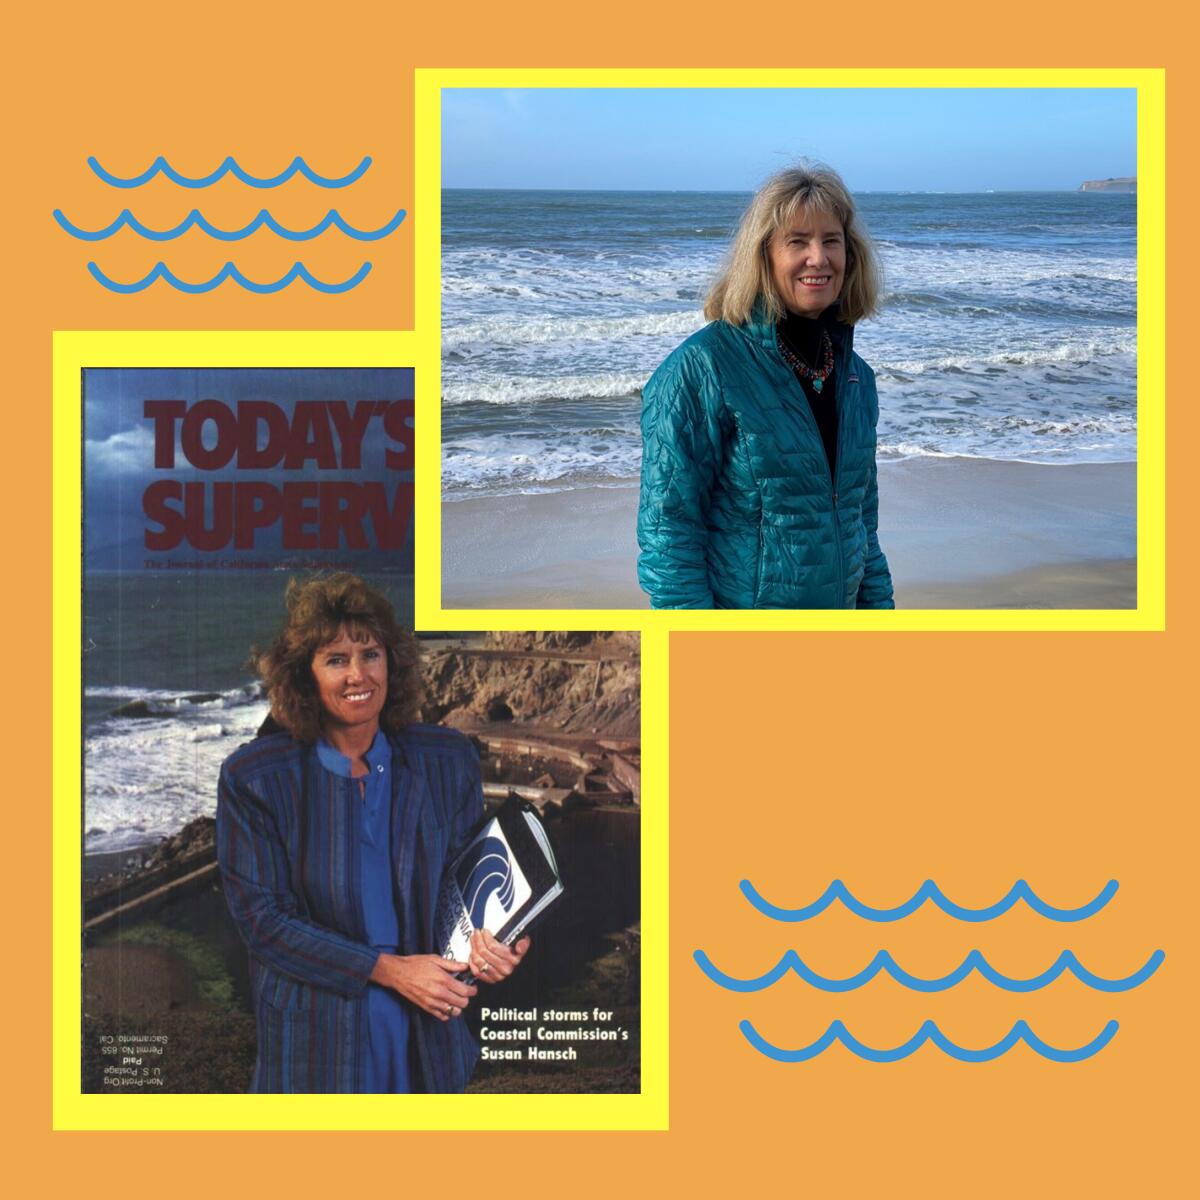 Illustration shows two images of Susan Hansch standing along the coastline.